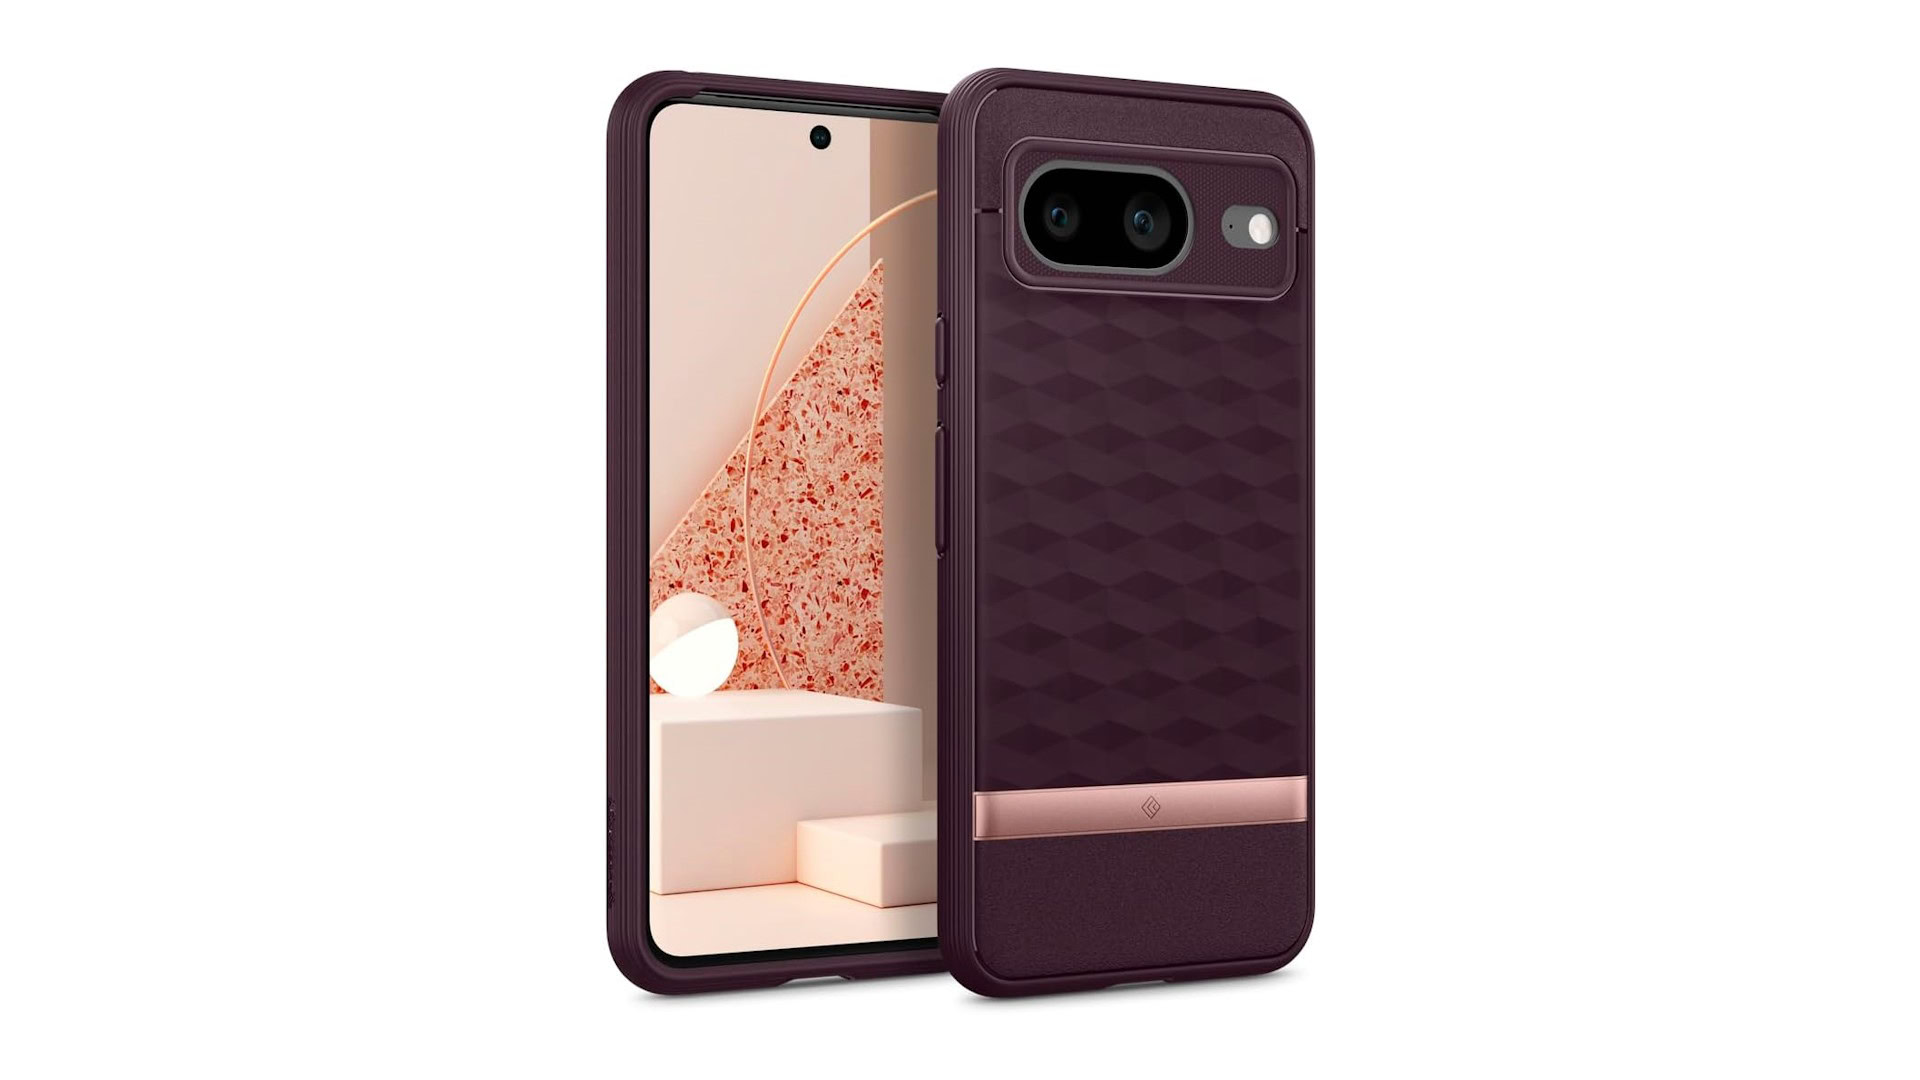 Keep your new Pixel stylish and safe with these cases